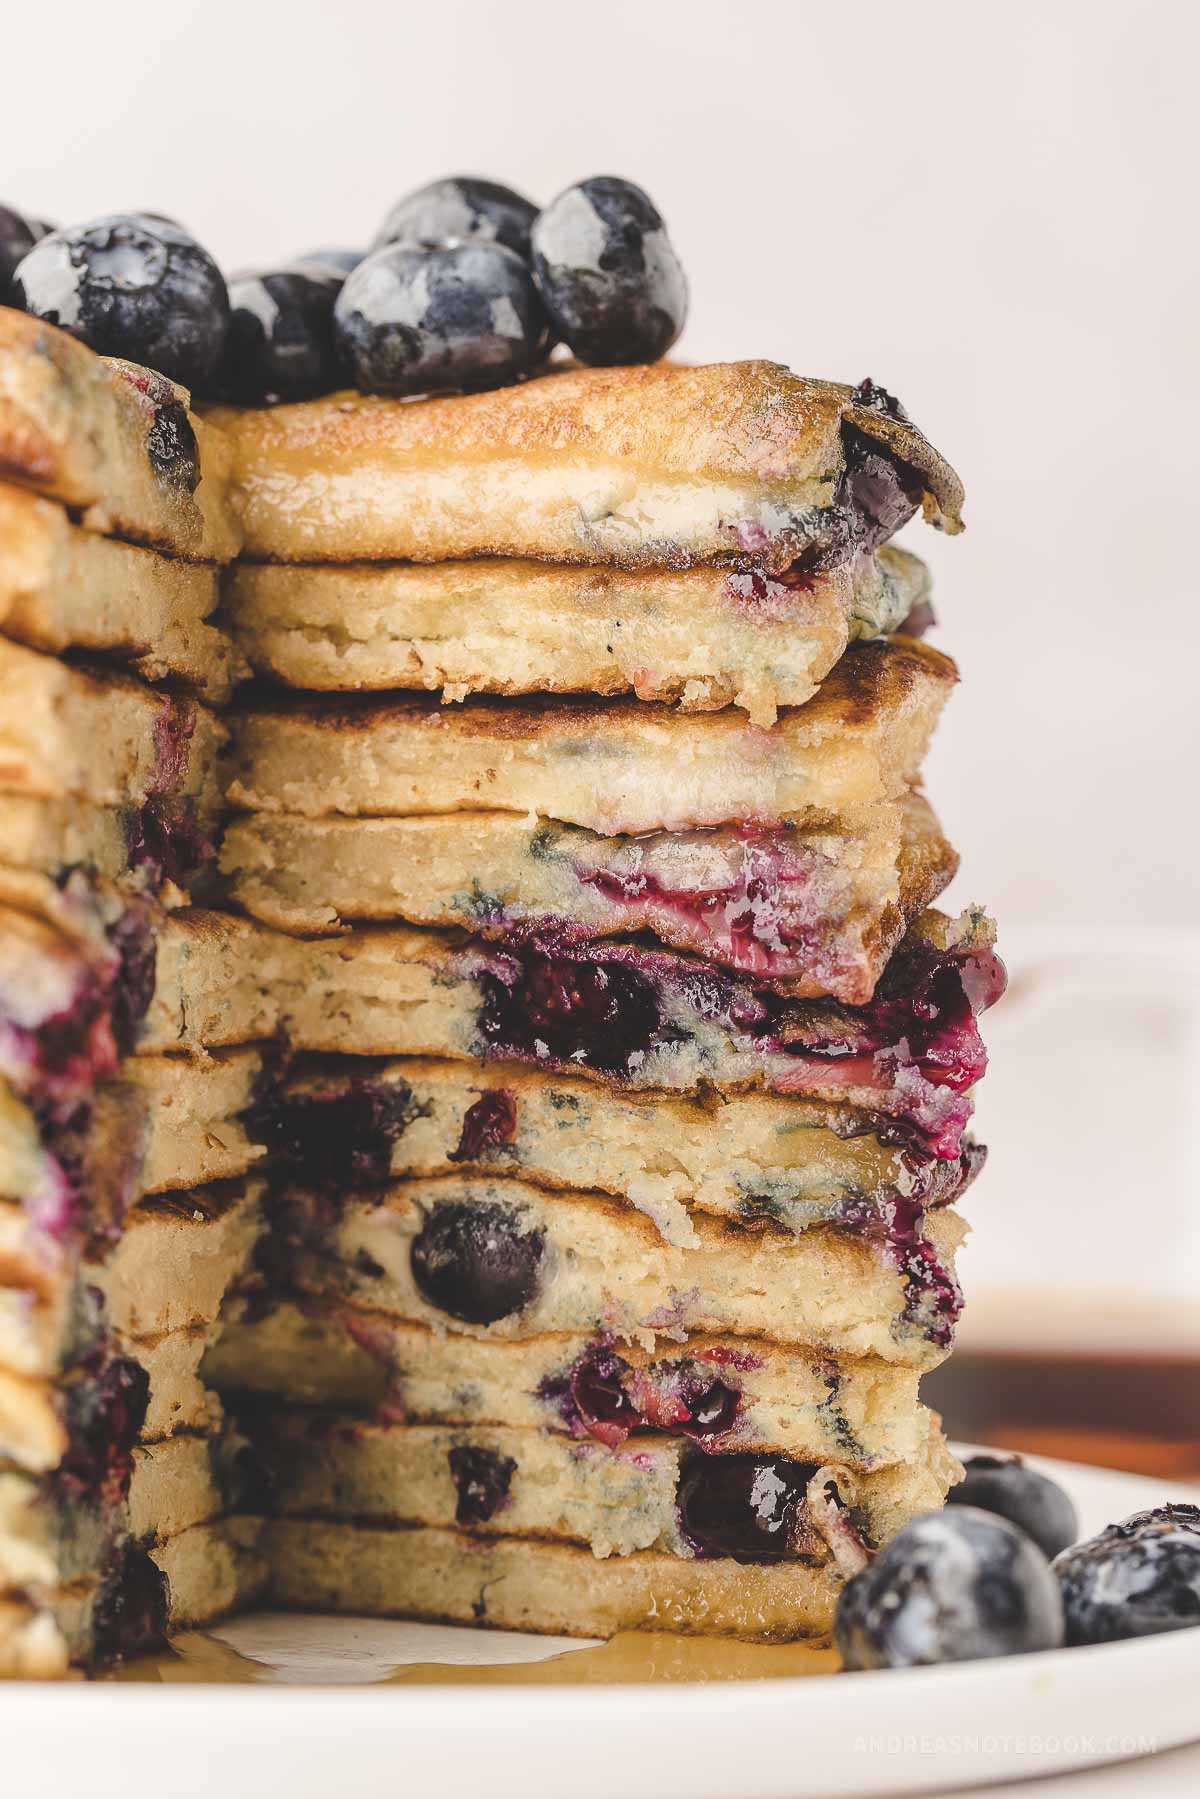 Tall stack of fluffy blueberry pancakes cut open with a pile of fresh blueberries on top.